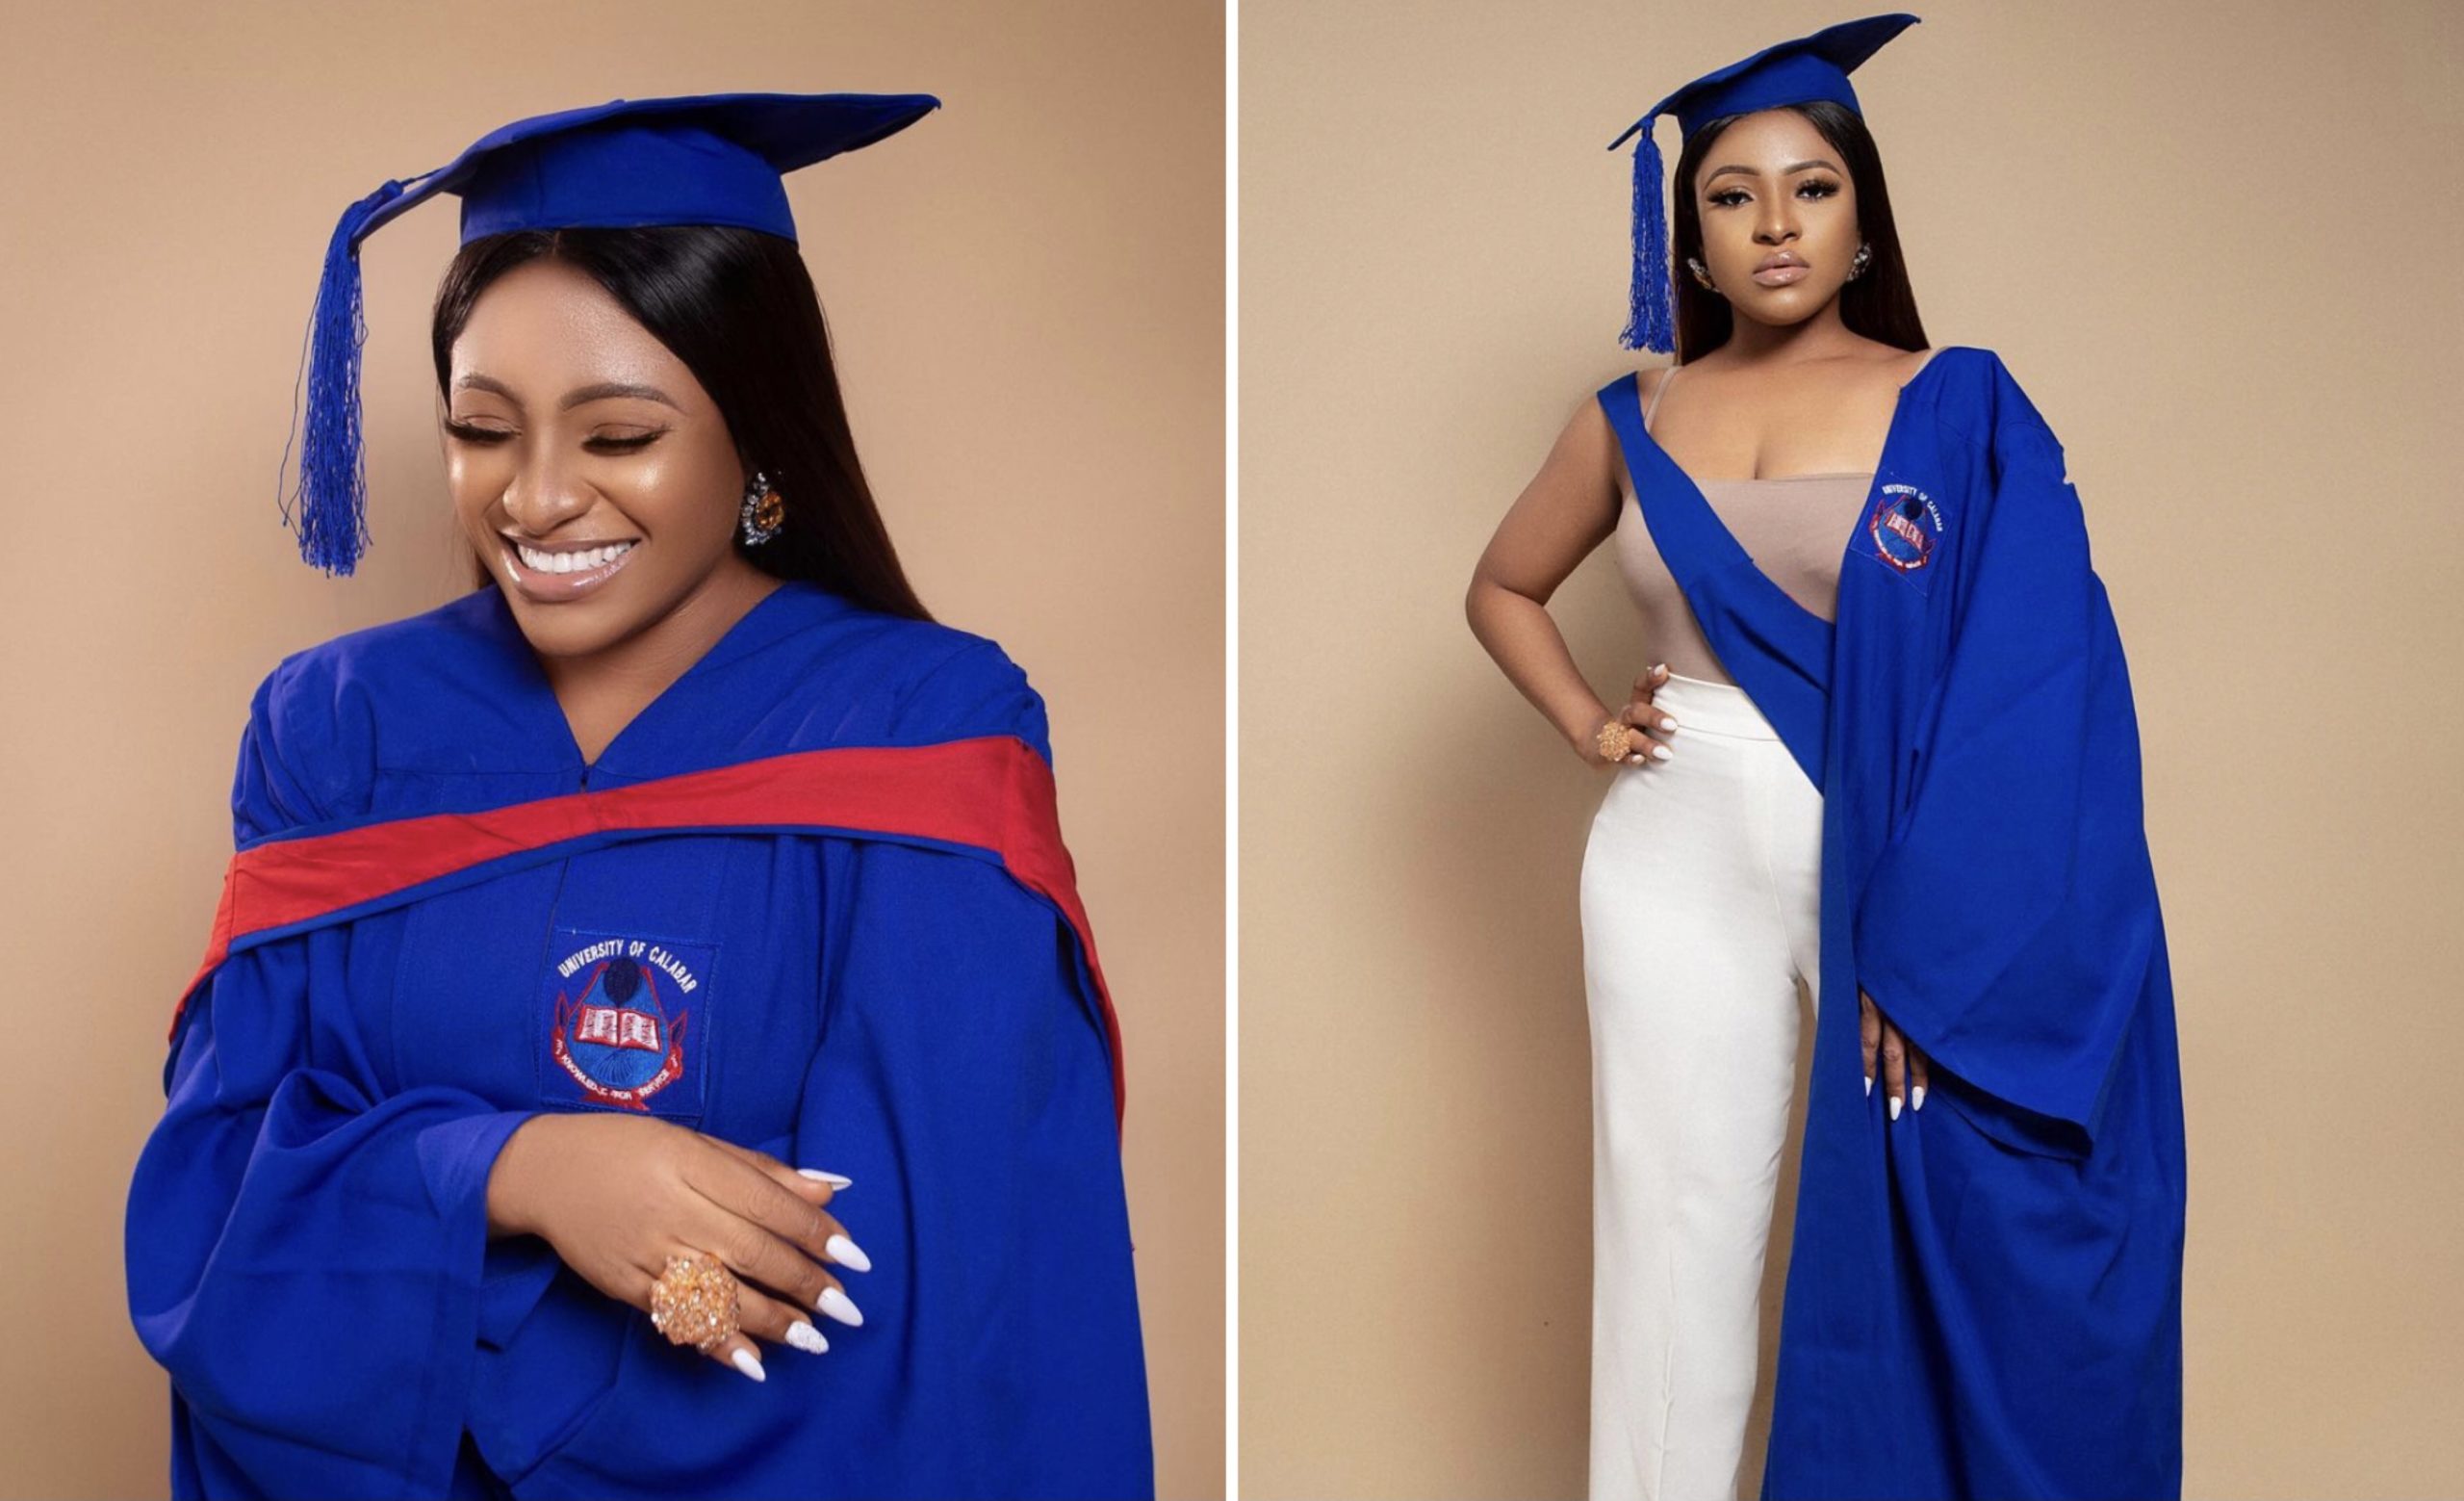 Woman Becomes First Student To Graduate With First Class In Department’s 44-Year History After Sitting For Final Exams Heavily Pregnant